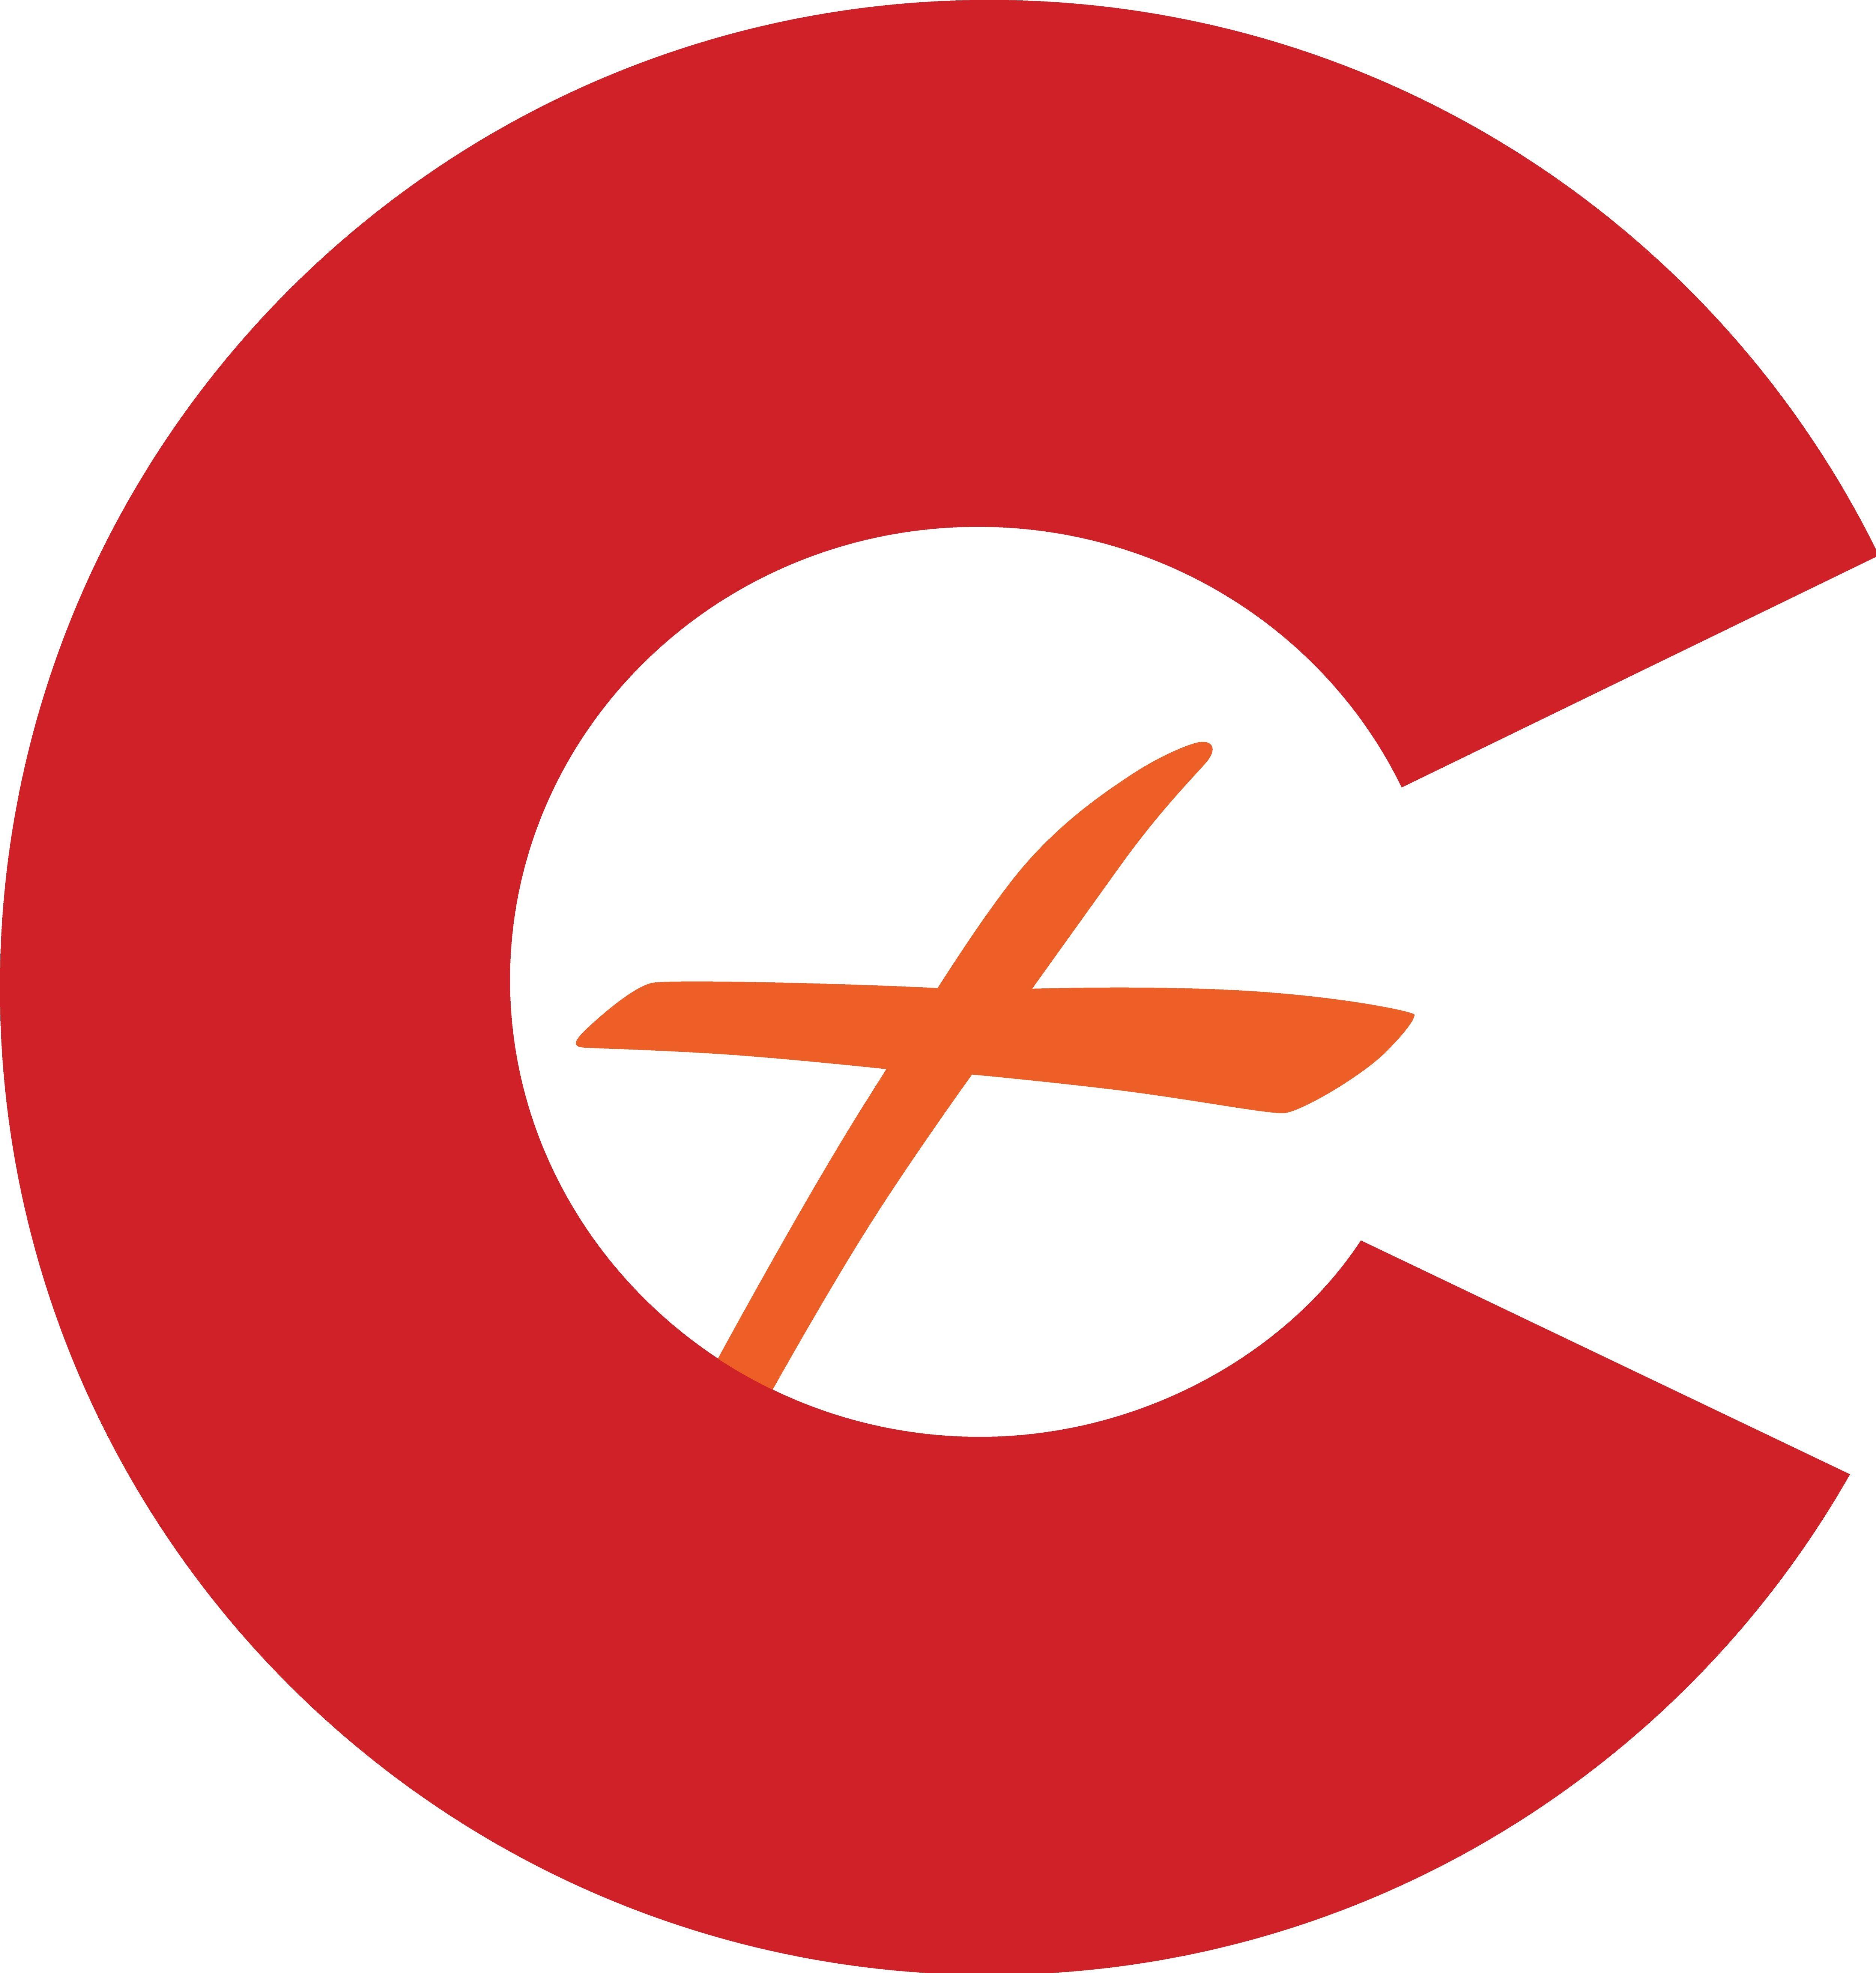 Red C Logo - About Us. Central Christian Church of Denver